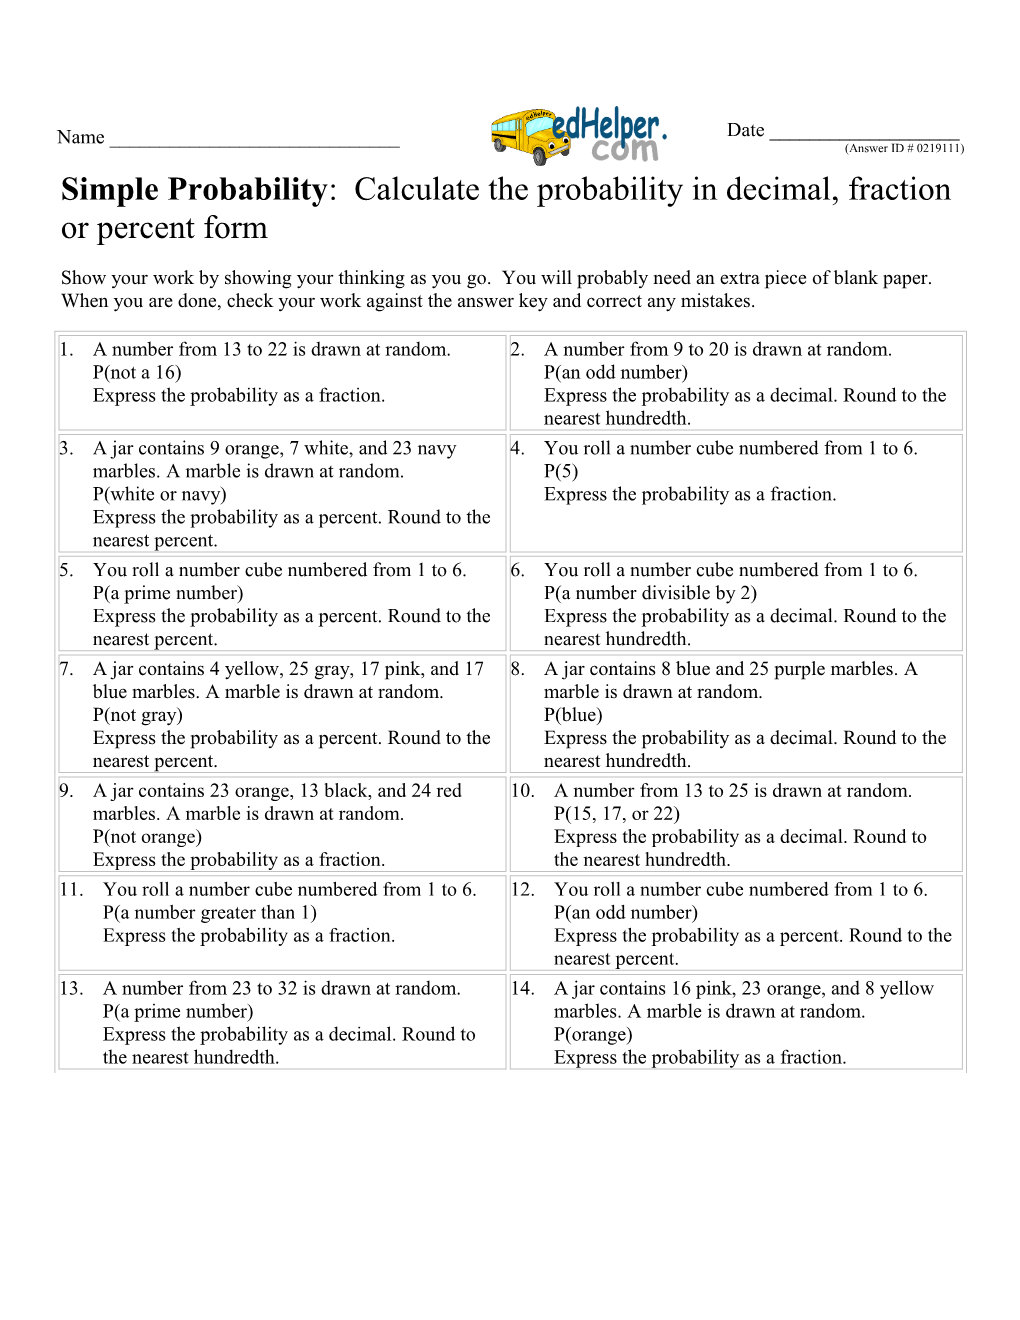 Simple Probability : Calculate the Probability in Decimal, Fraction Or Percent Form